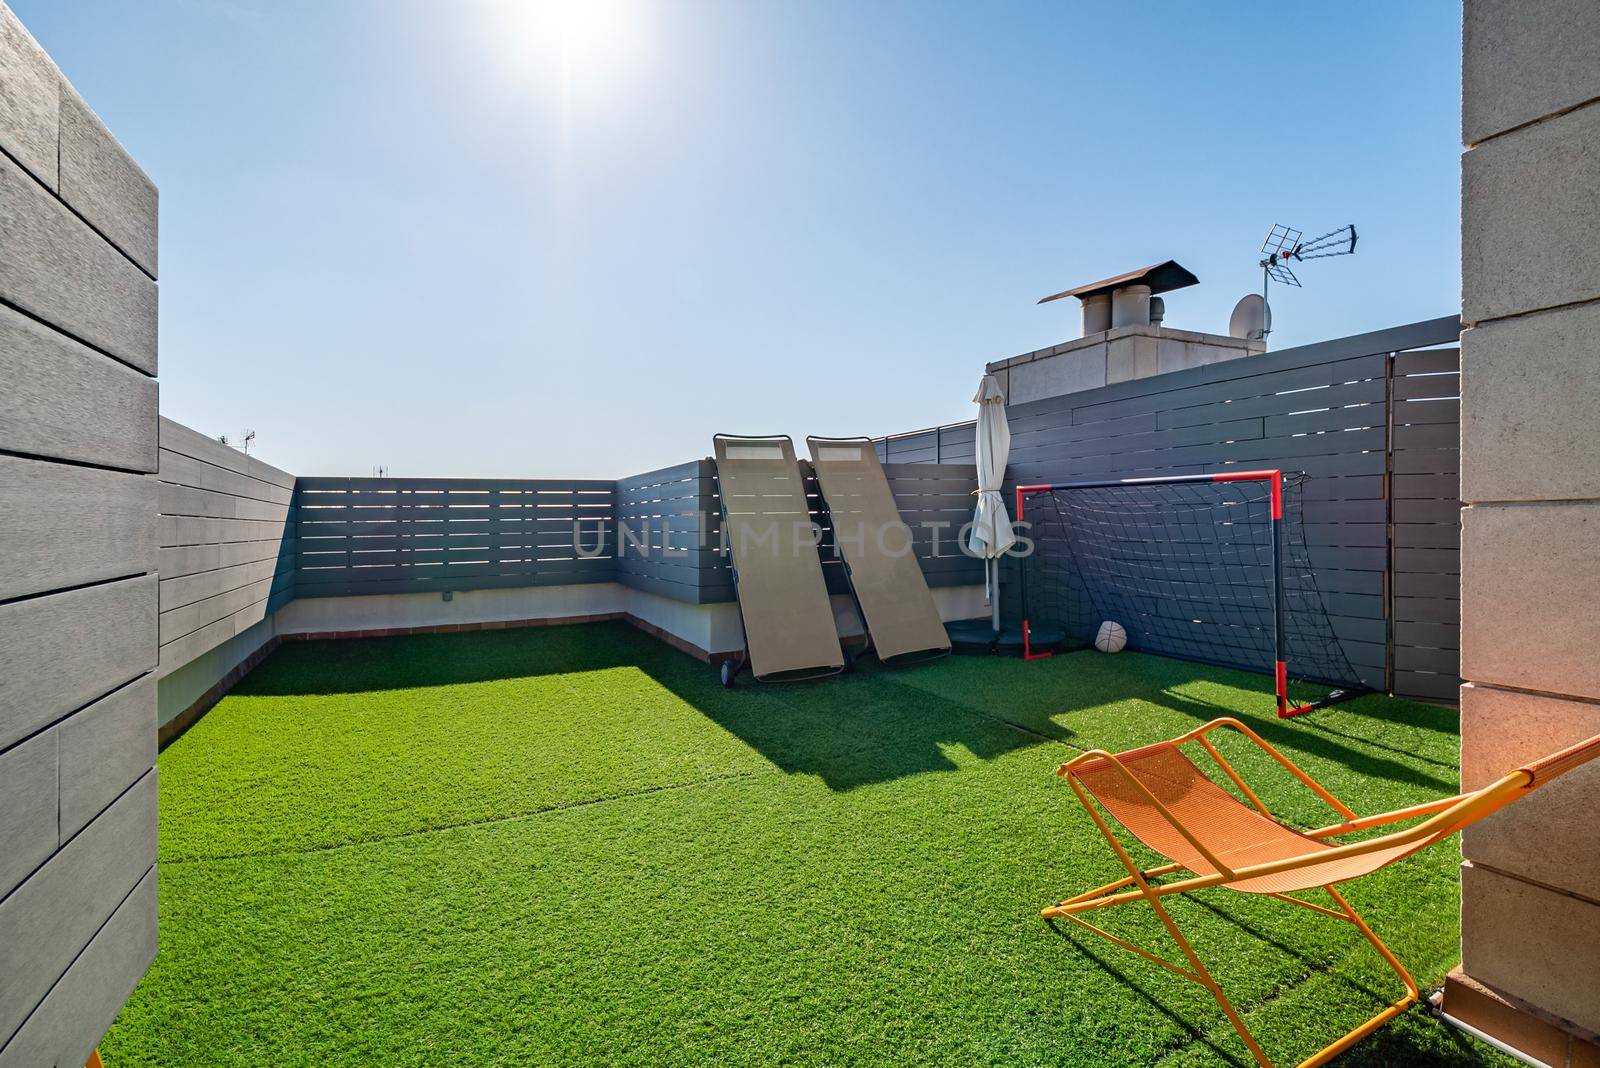 Private terrace with sunbeds, kids soccer gates and artificial turf on sunny day with blue sky